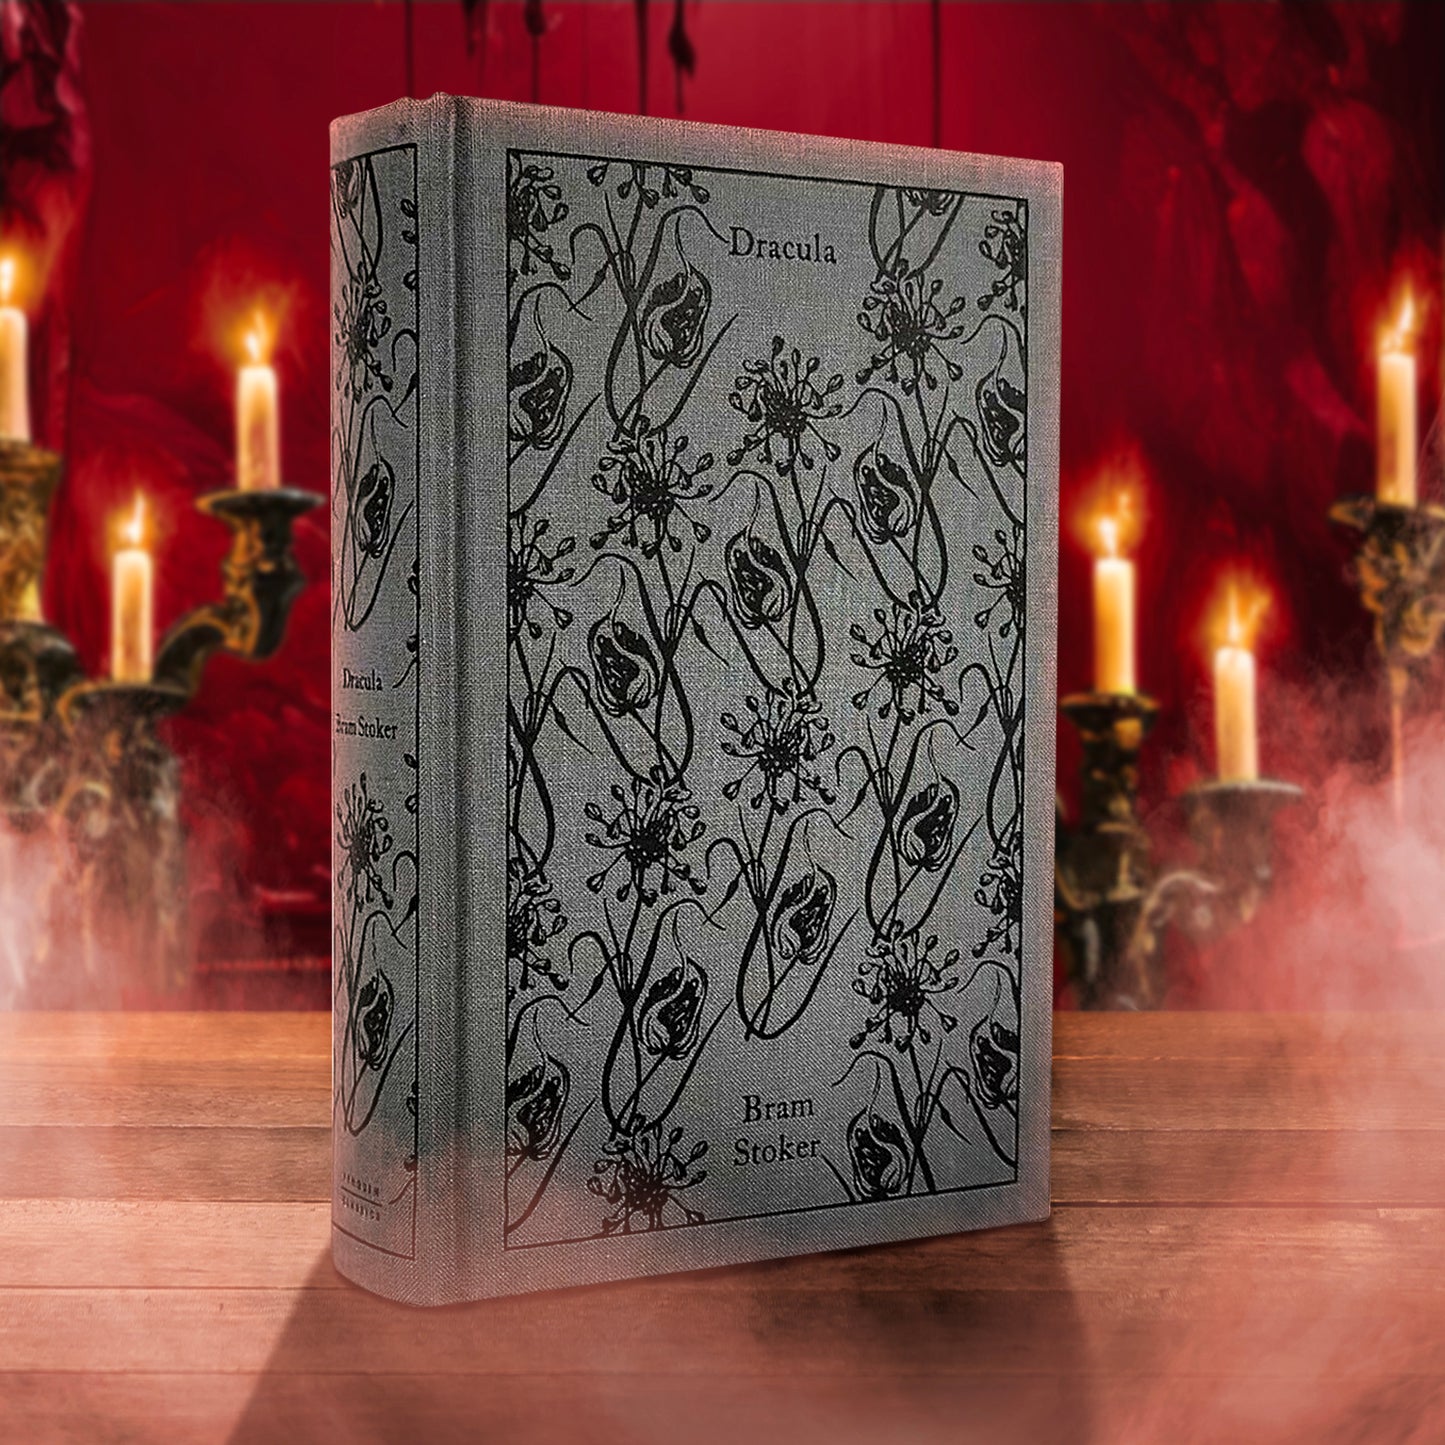 A copy of the Penguin Clothbound edition of DRACULA by Bram Stoker, standing on a dark wood table in front of a dark red wall and vintage-style candles.. The cloth covering is a stone-grey and there's an all-over pattern on the front.